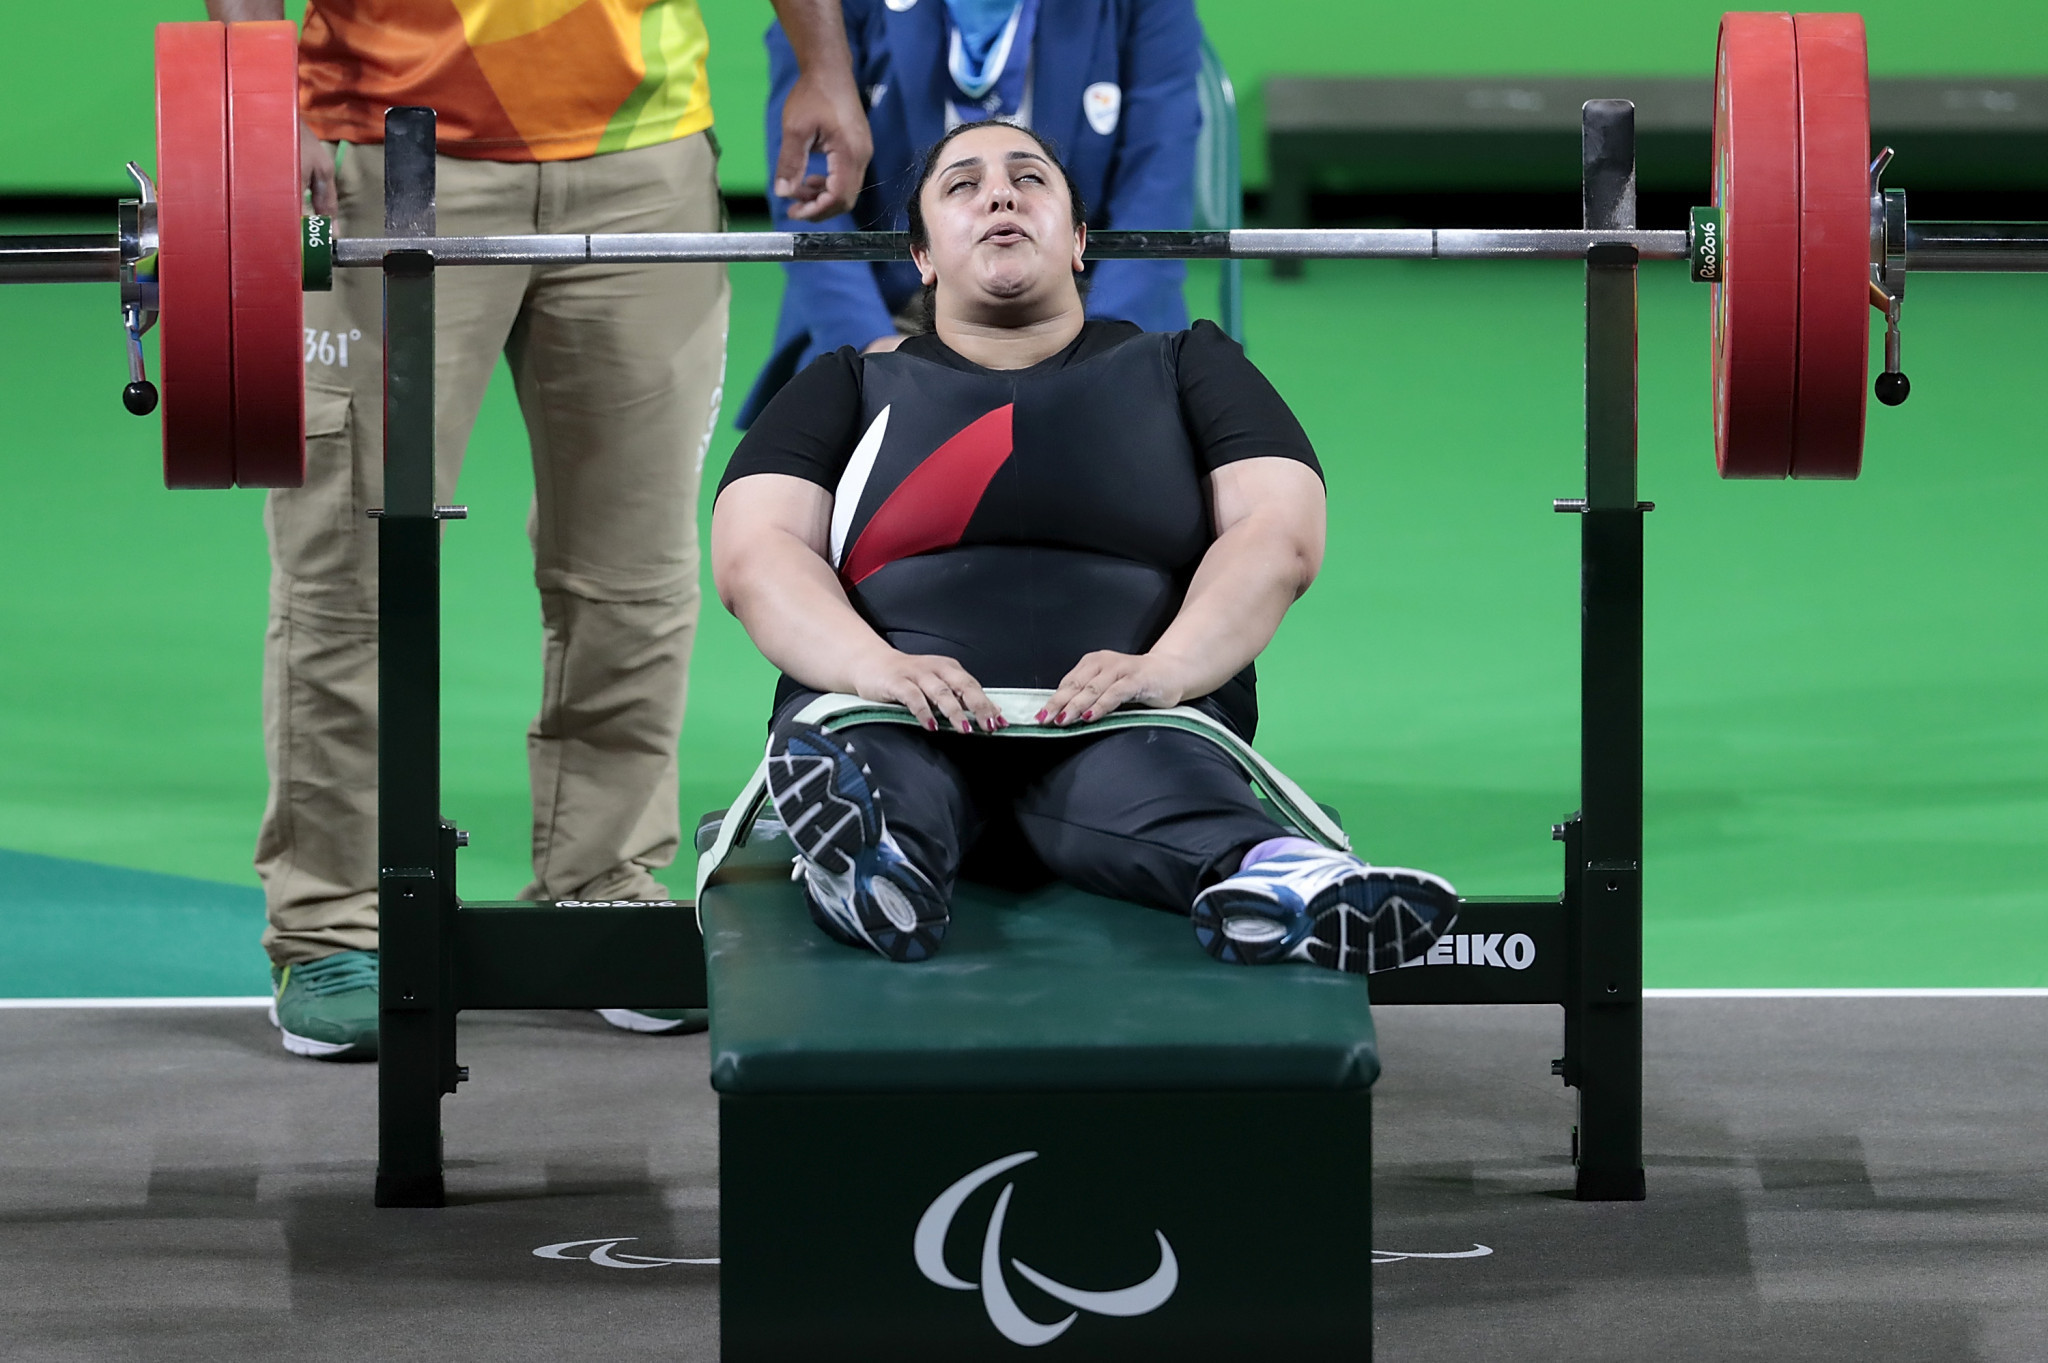 Paralympic champion Randa Mahmoud clinched the gold medal in the women's over-86 kilograms event in Dubai ©Getty Images